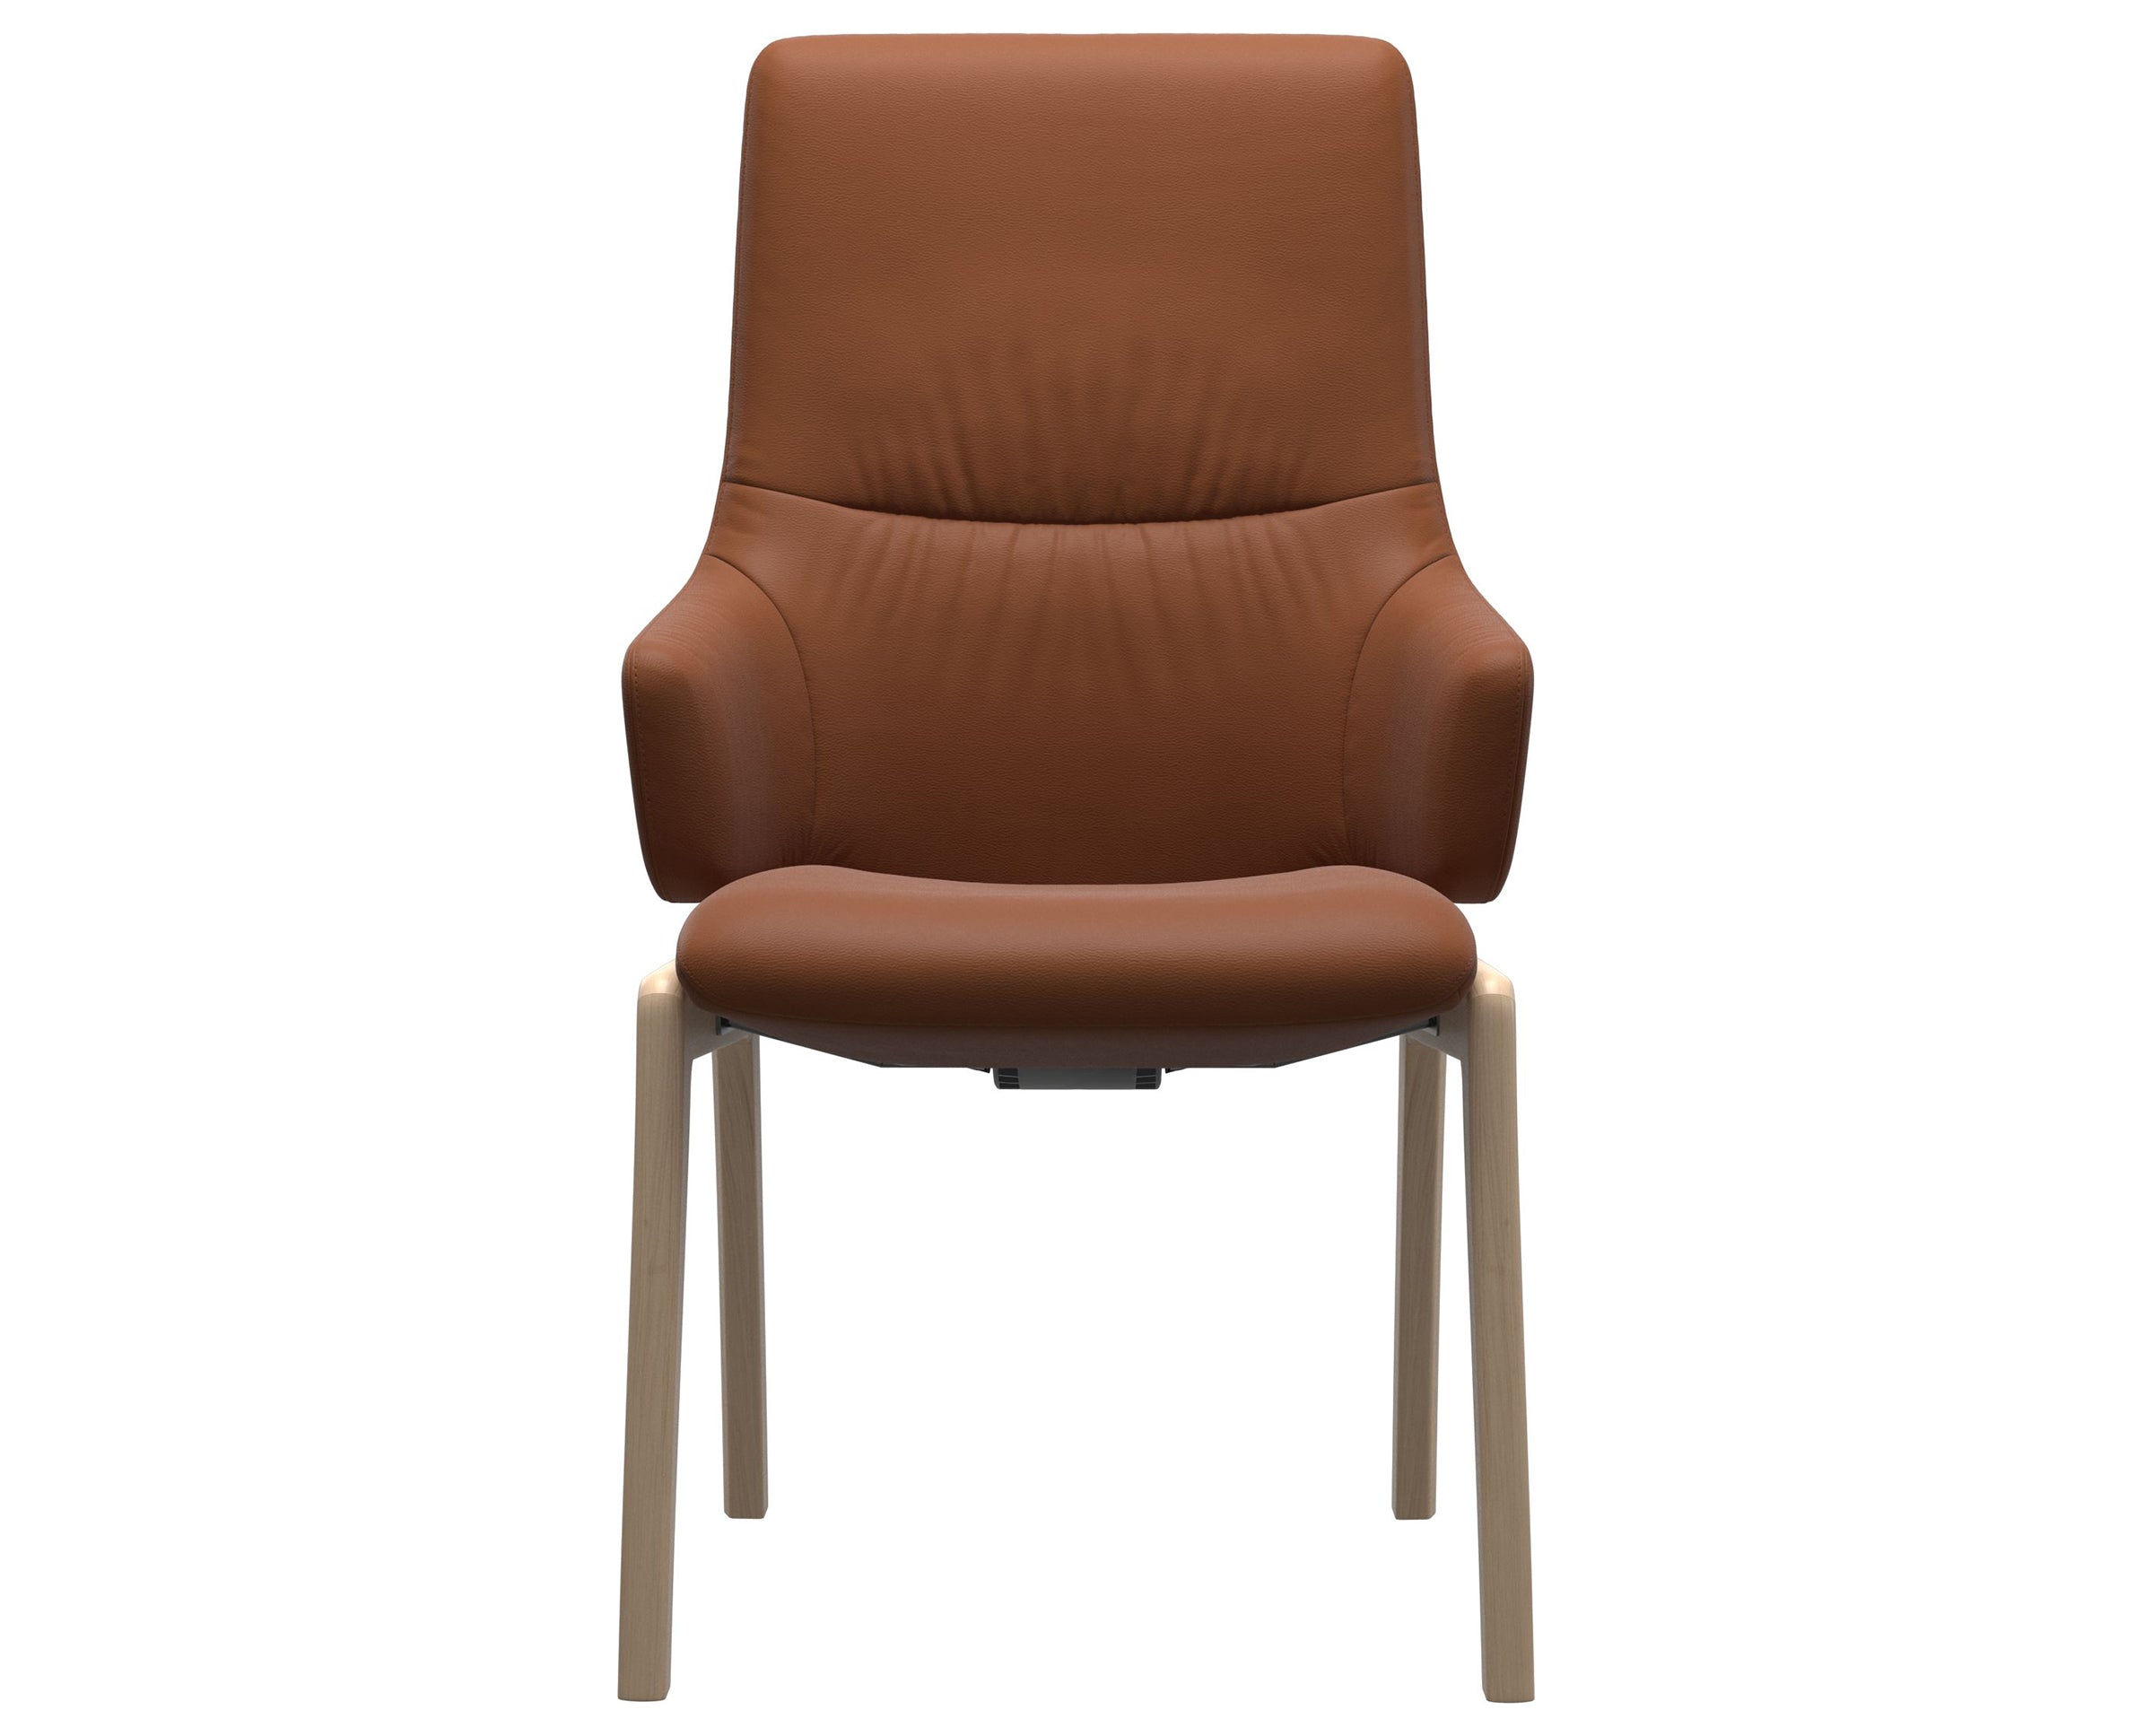 Paloma Leather New Cognac and Natural Base | Stressless Mint High Back D100 Dining Chair w/Arms | Valley Ridge Furniture